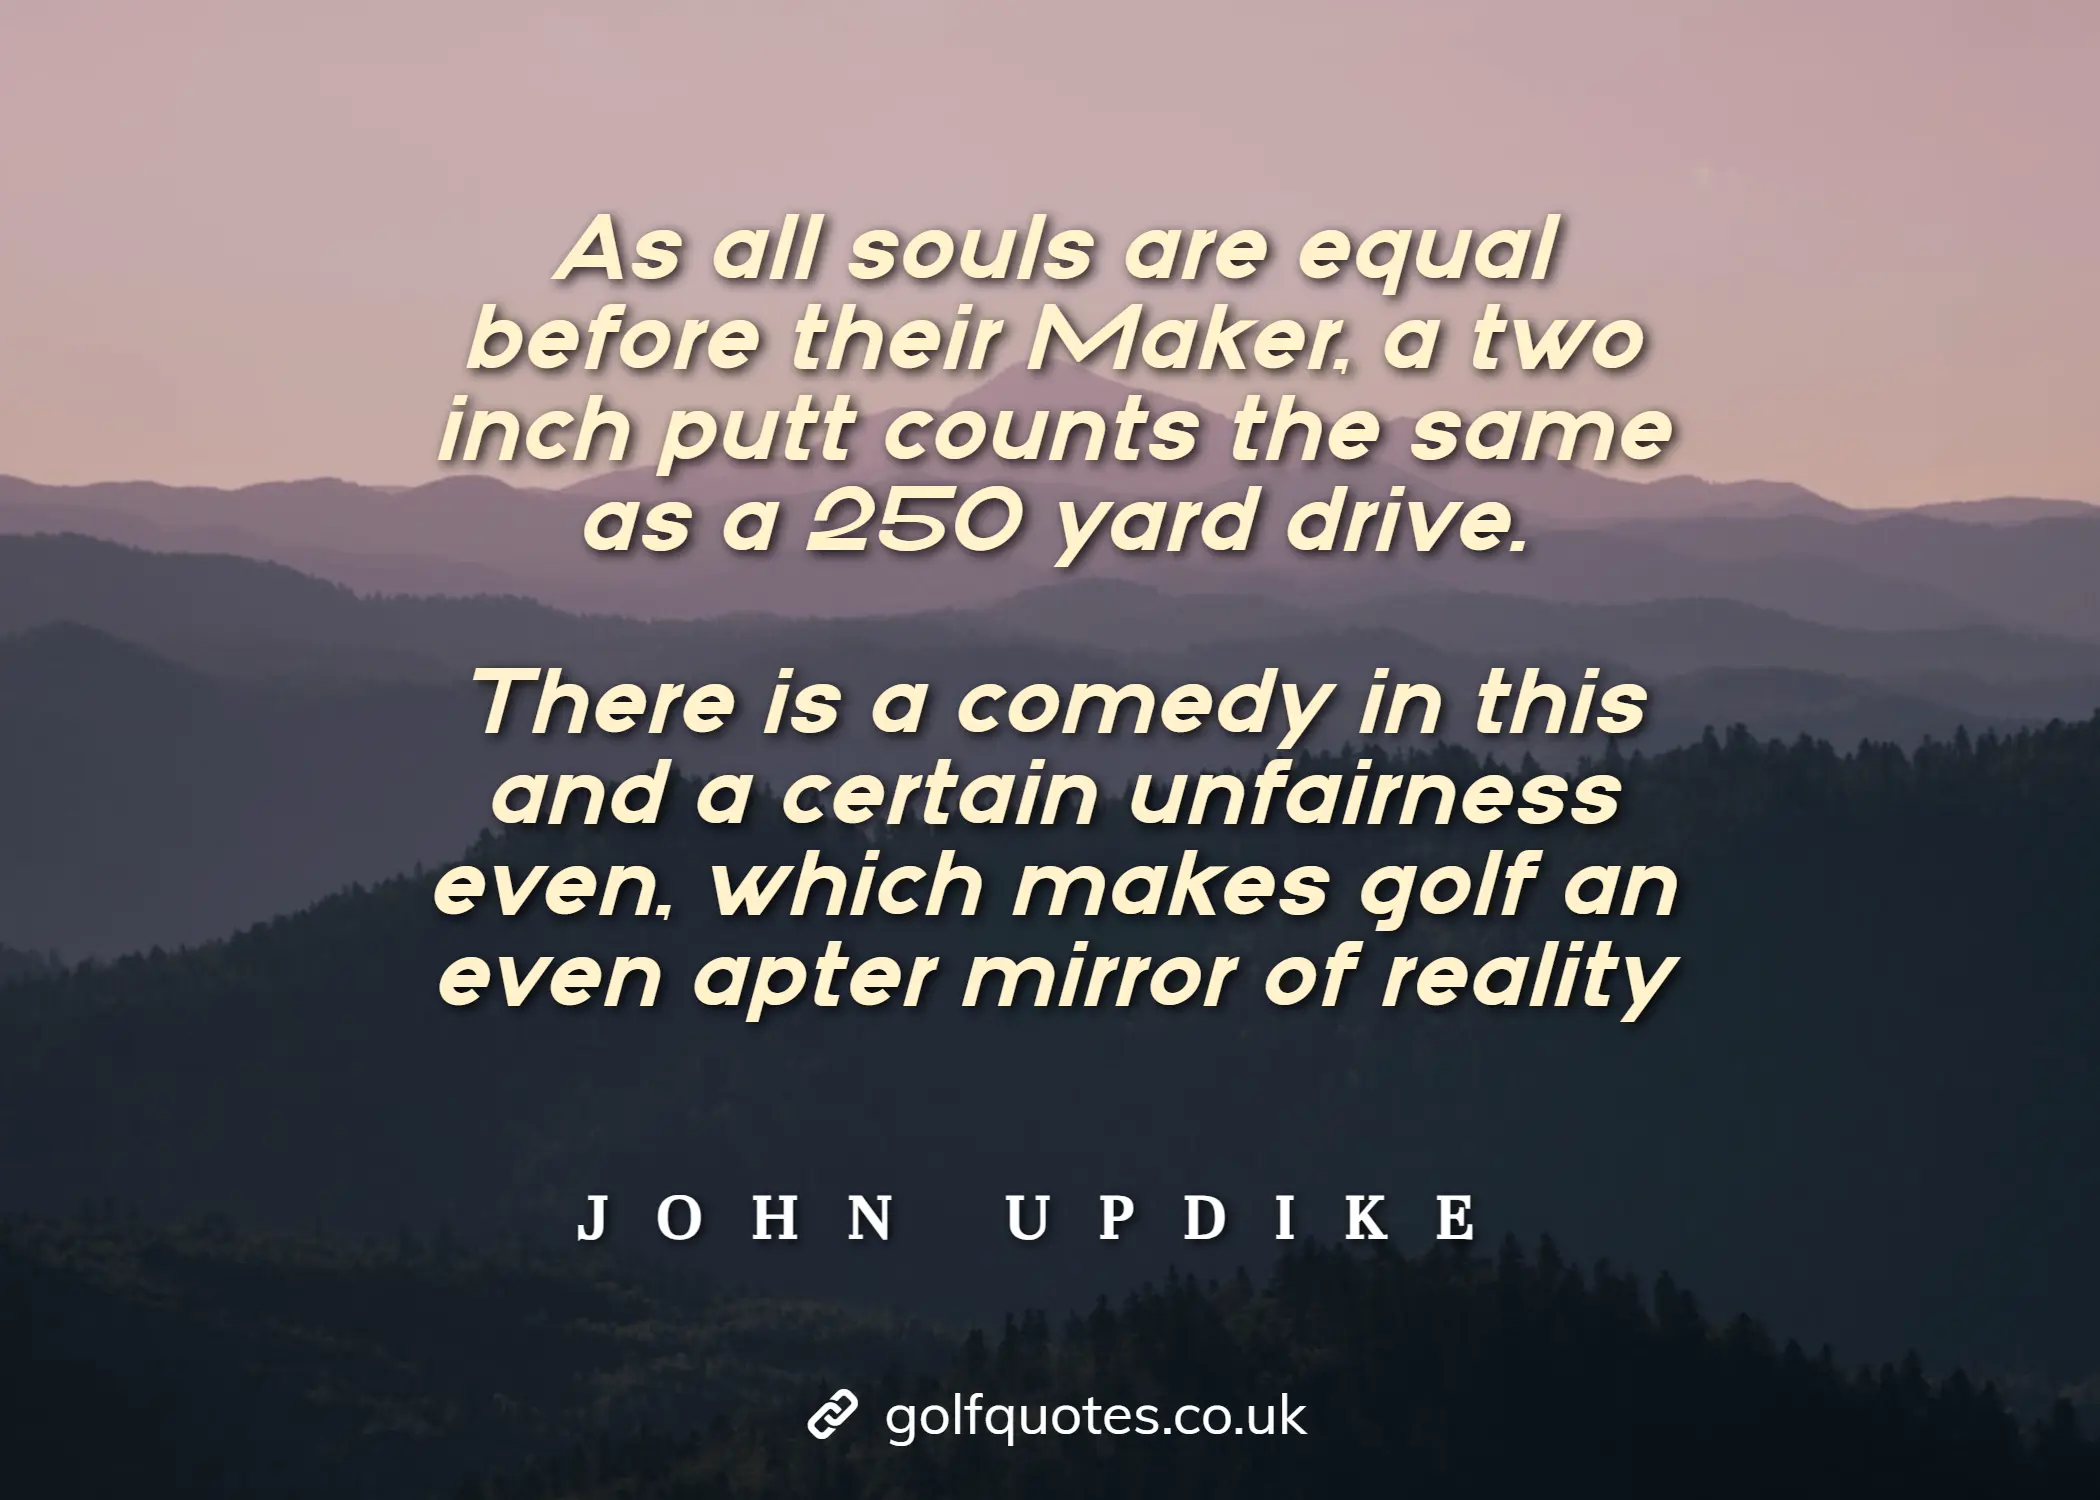 As all souls are equal before their Maker, a two inch putt counts the same as a 250 yard drive.  There is a comedy in this and a certain unfairness even, which makes golf an even apter mirror of reality